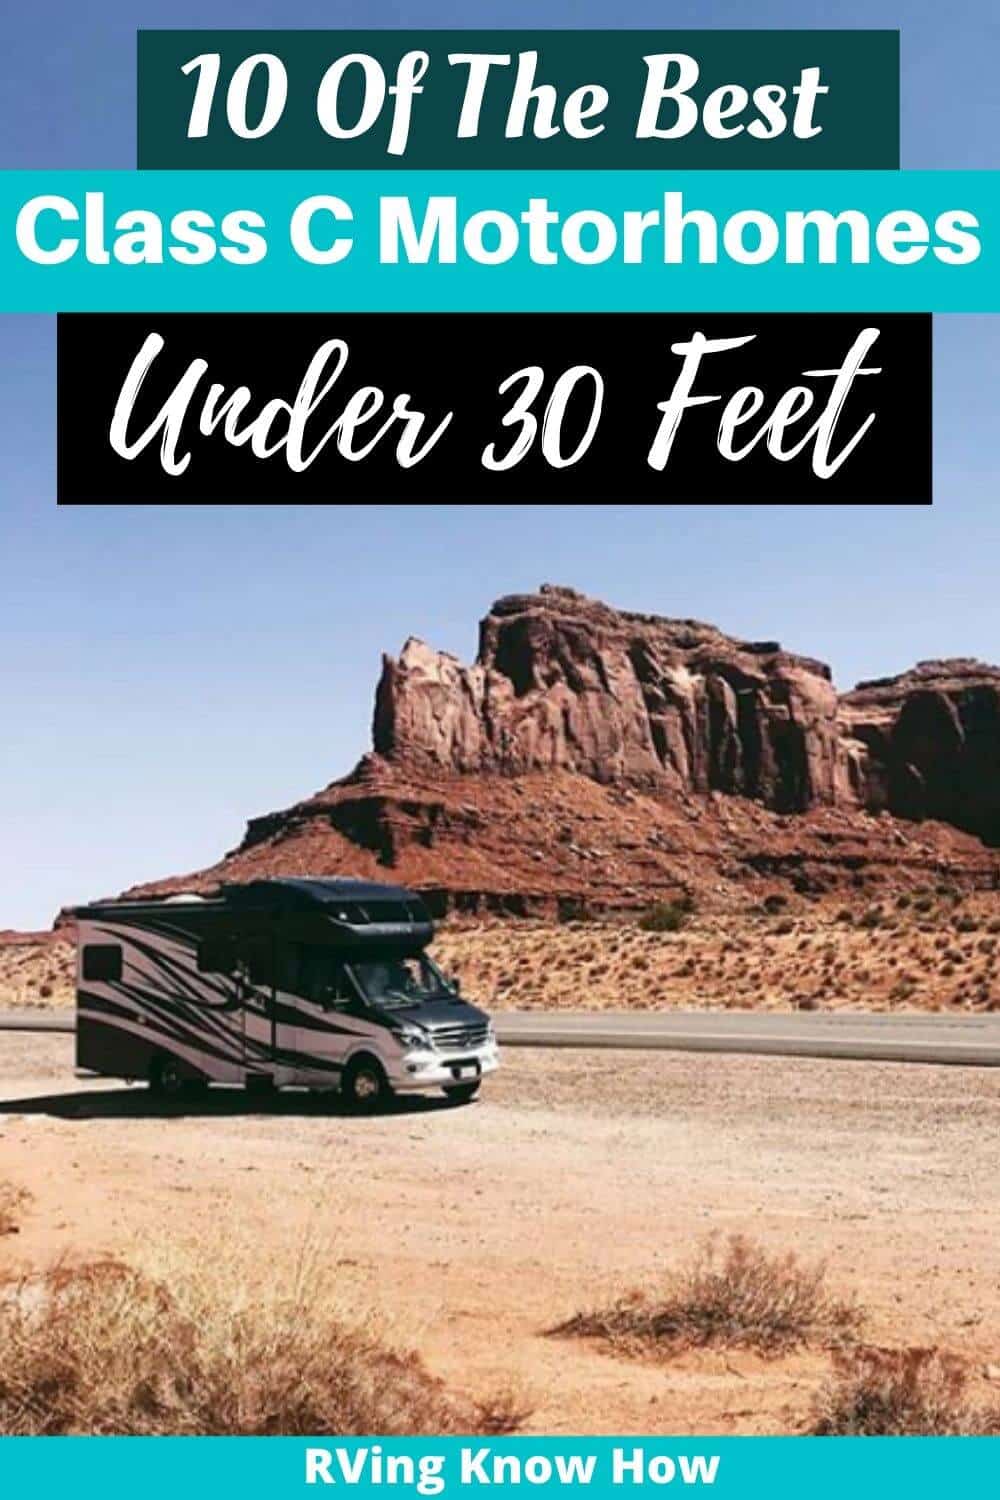 10 Compact Class C RVs Under 30 Feet on the Market: Video Tours!